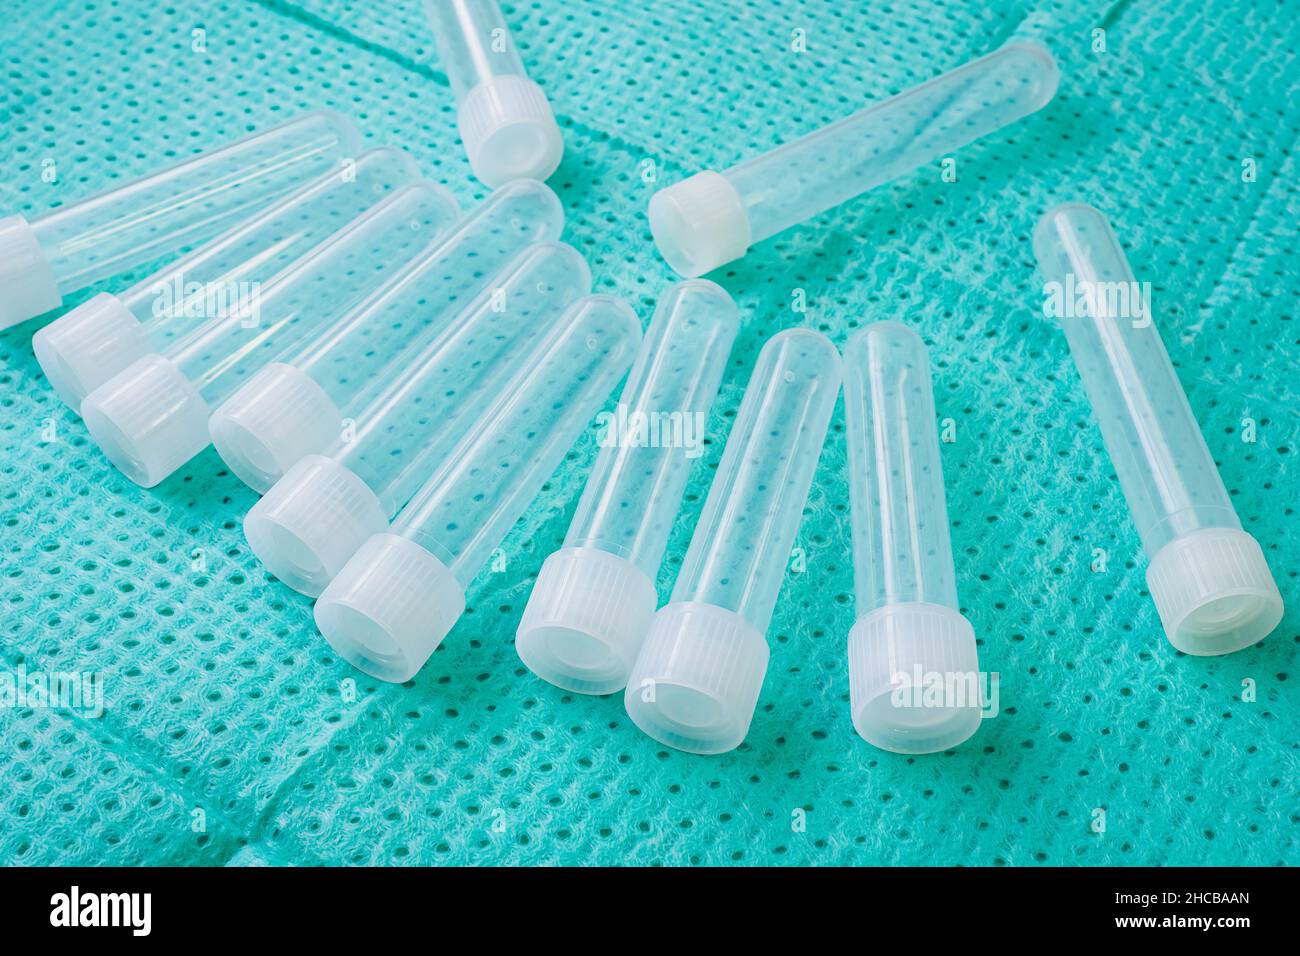 Plastic test tubes with caps for the collection of samples. Sampling ...